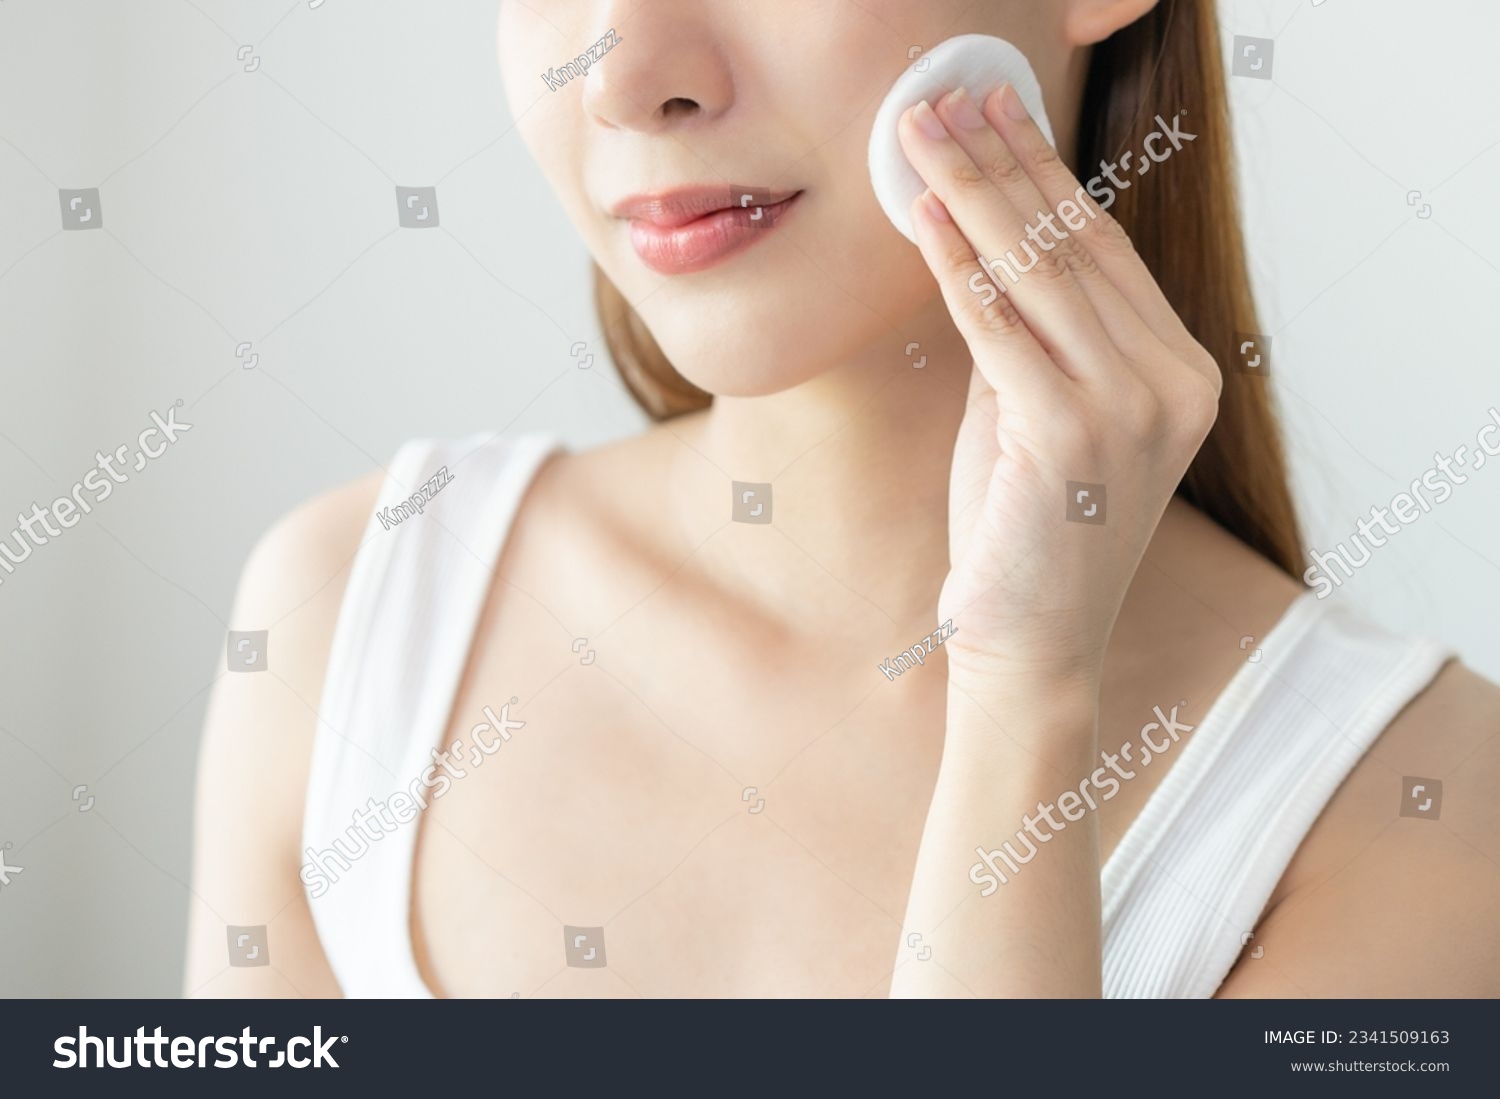 Happy beauty, attractive asian young woman, girl looking camera hand holding cotton pad, applying facial wipe on her face remover makeup, essence or lotion of skin care. Isolated on white background. #2341509163